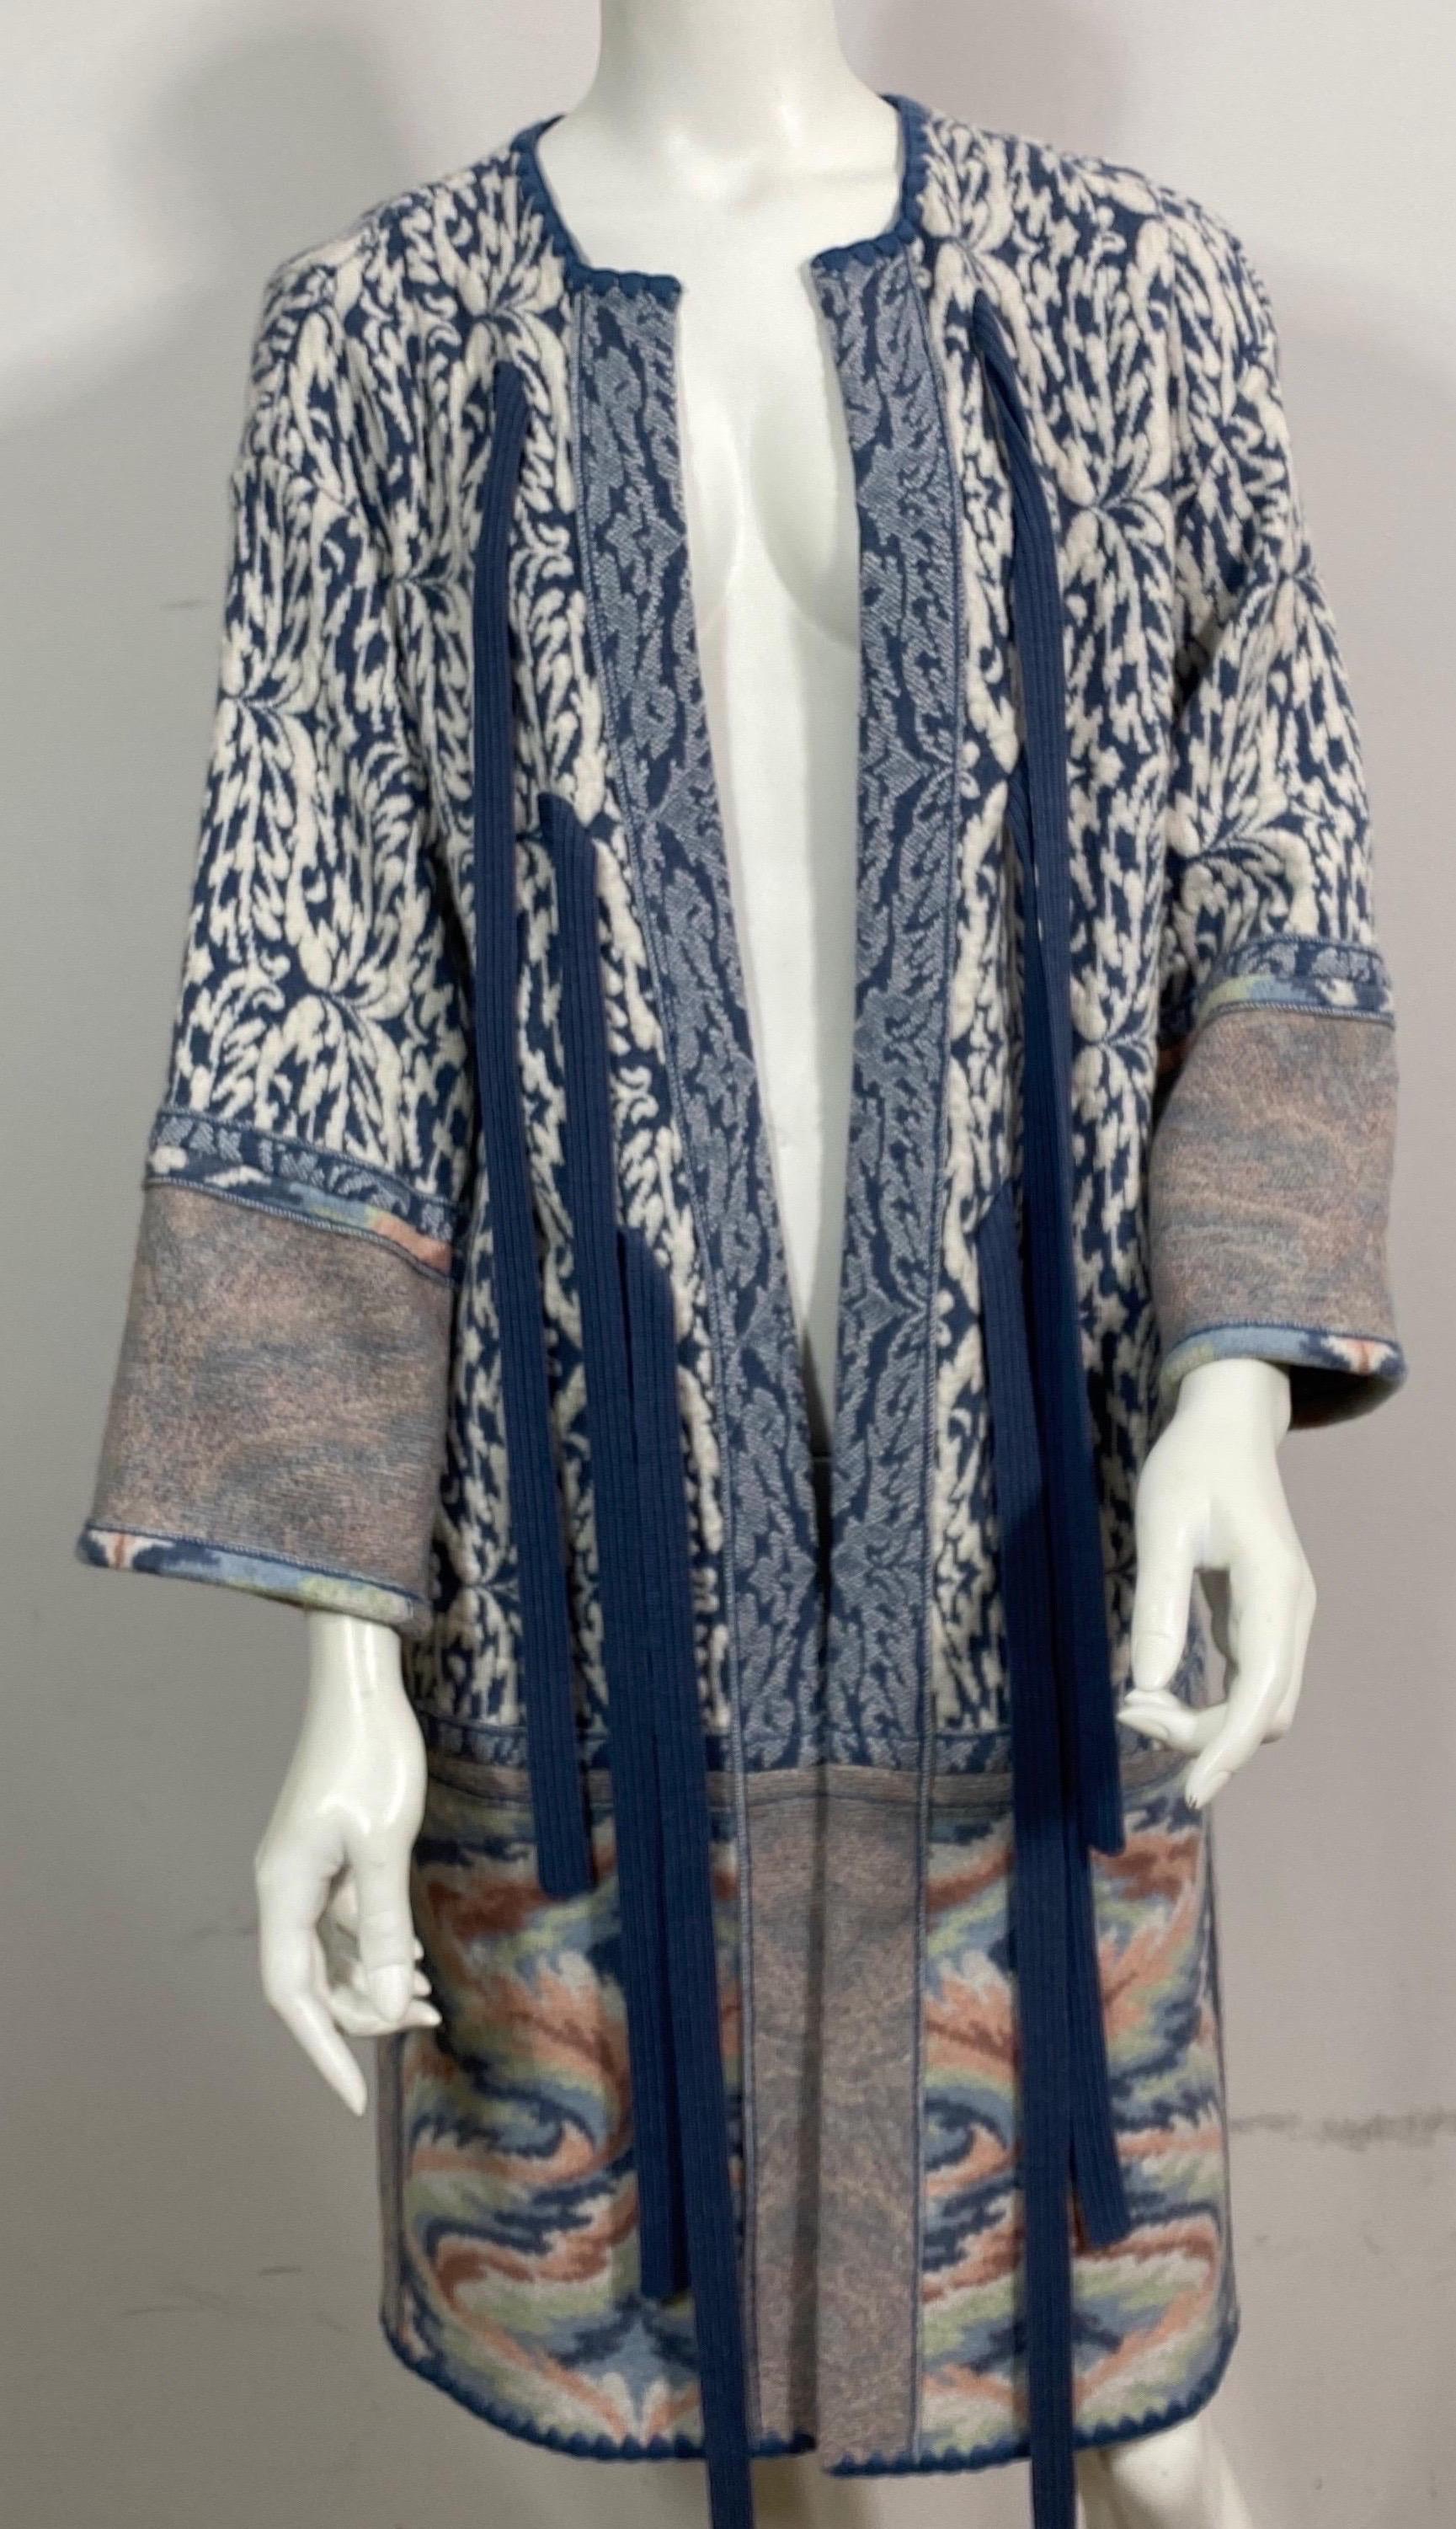 Missoni Blue and Cream Wool Knit Sweater Coat - Size Small/Medium For Sale 11